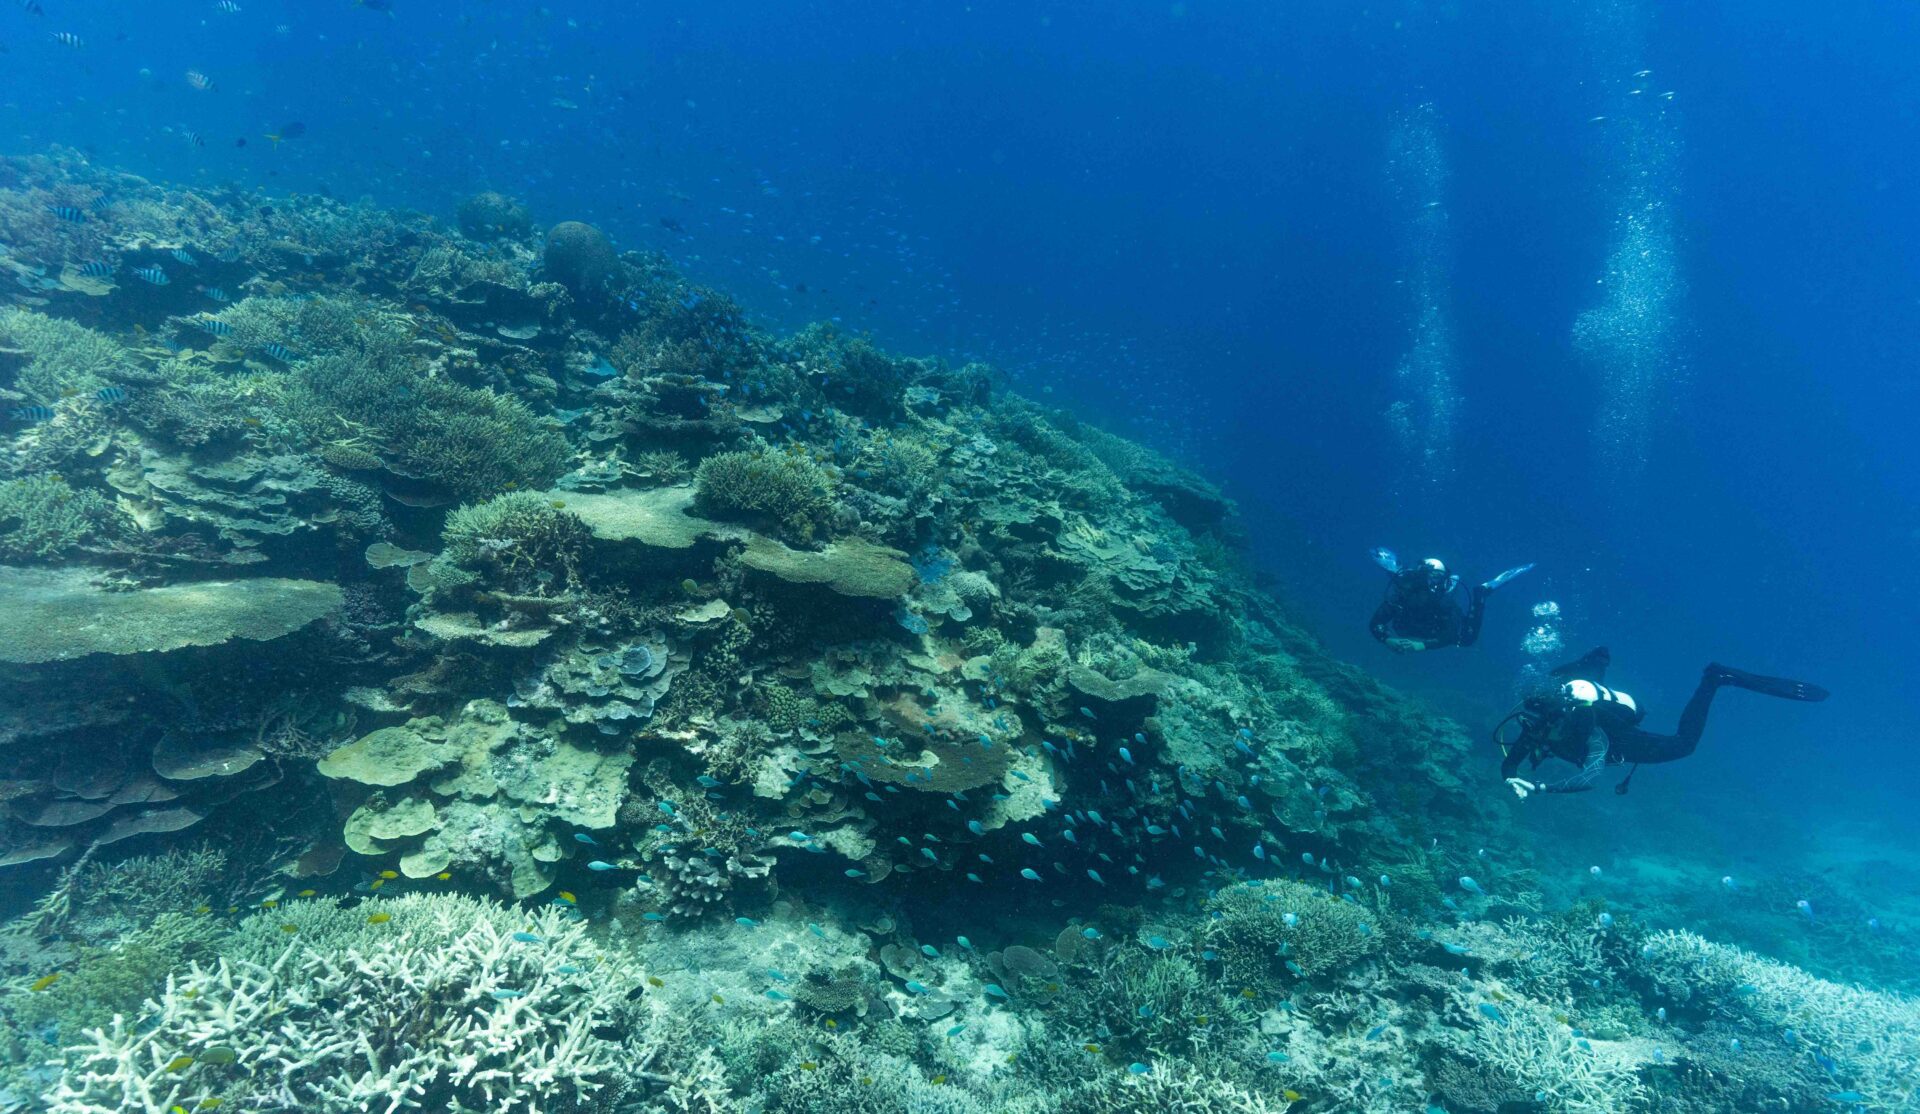 New Dive Centre for the Southern Great Barrier Reef at 1770